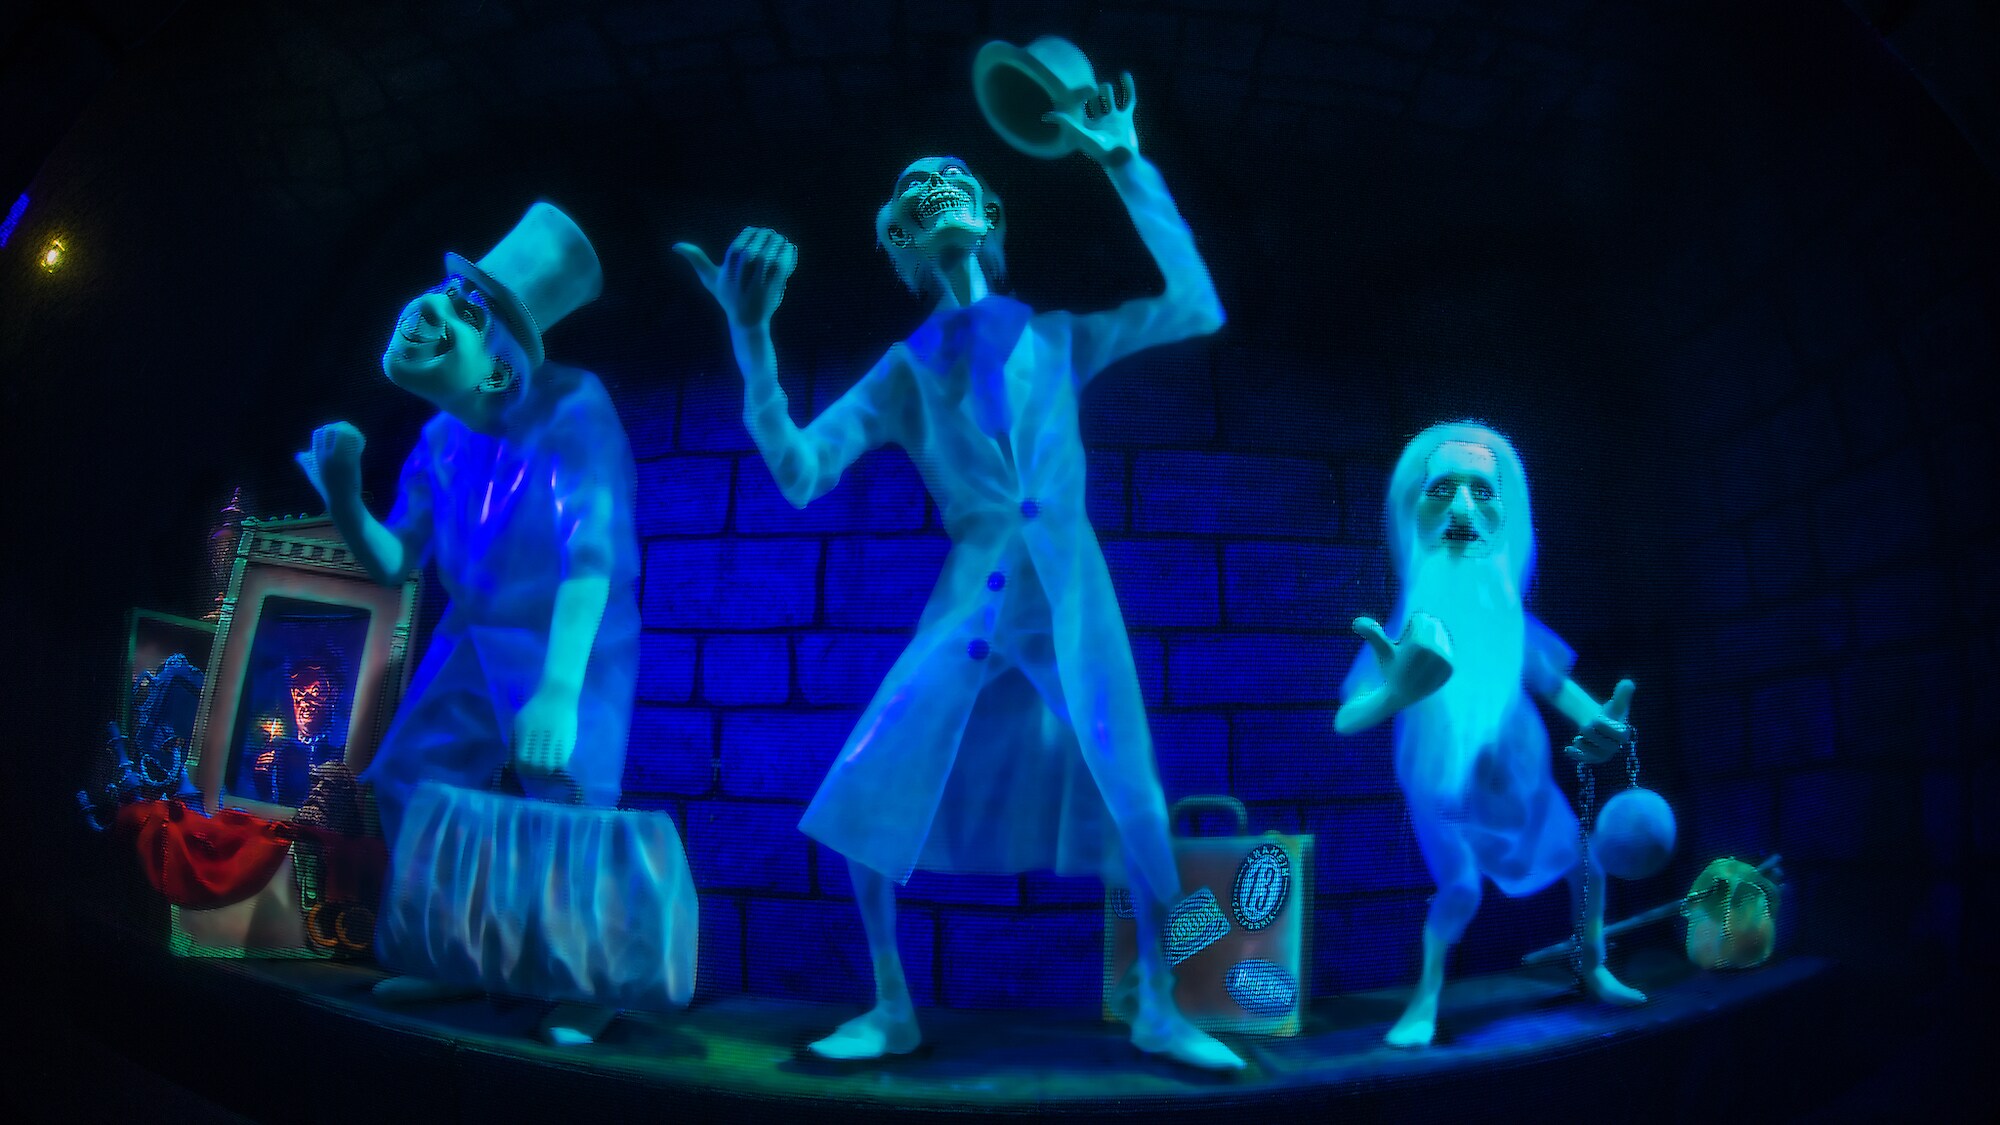 Image of the ghosts from the Haunted Mansion.